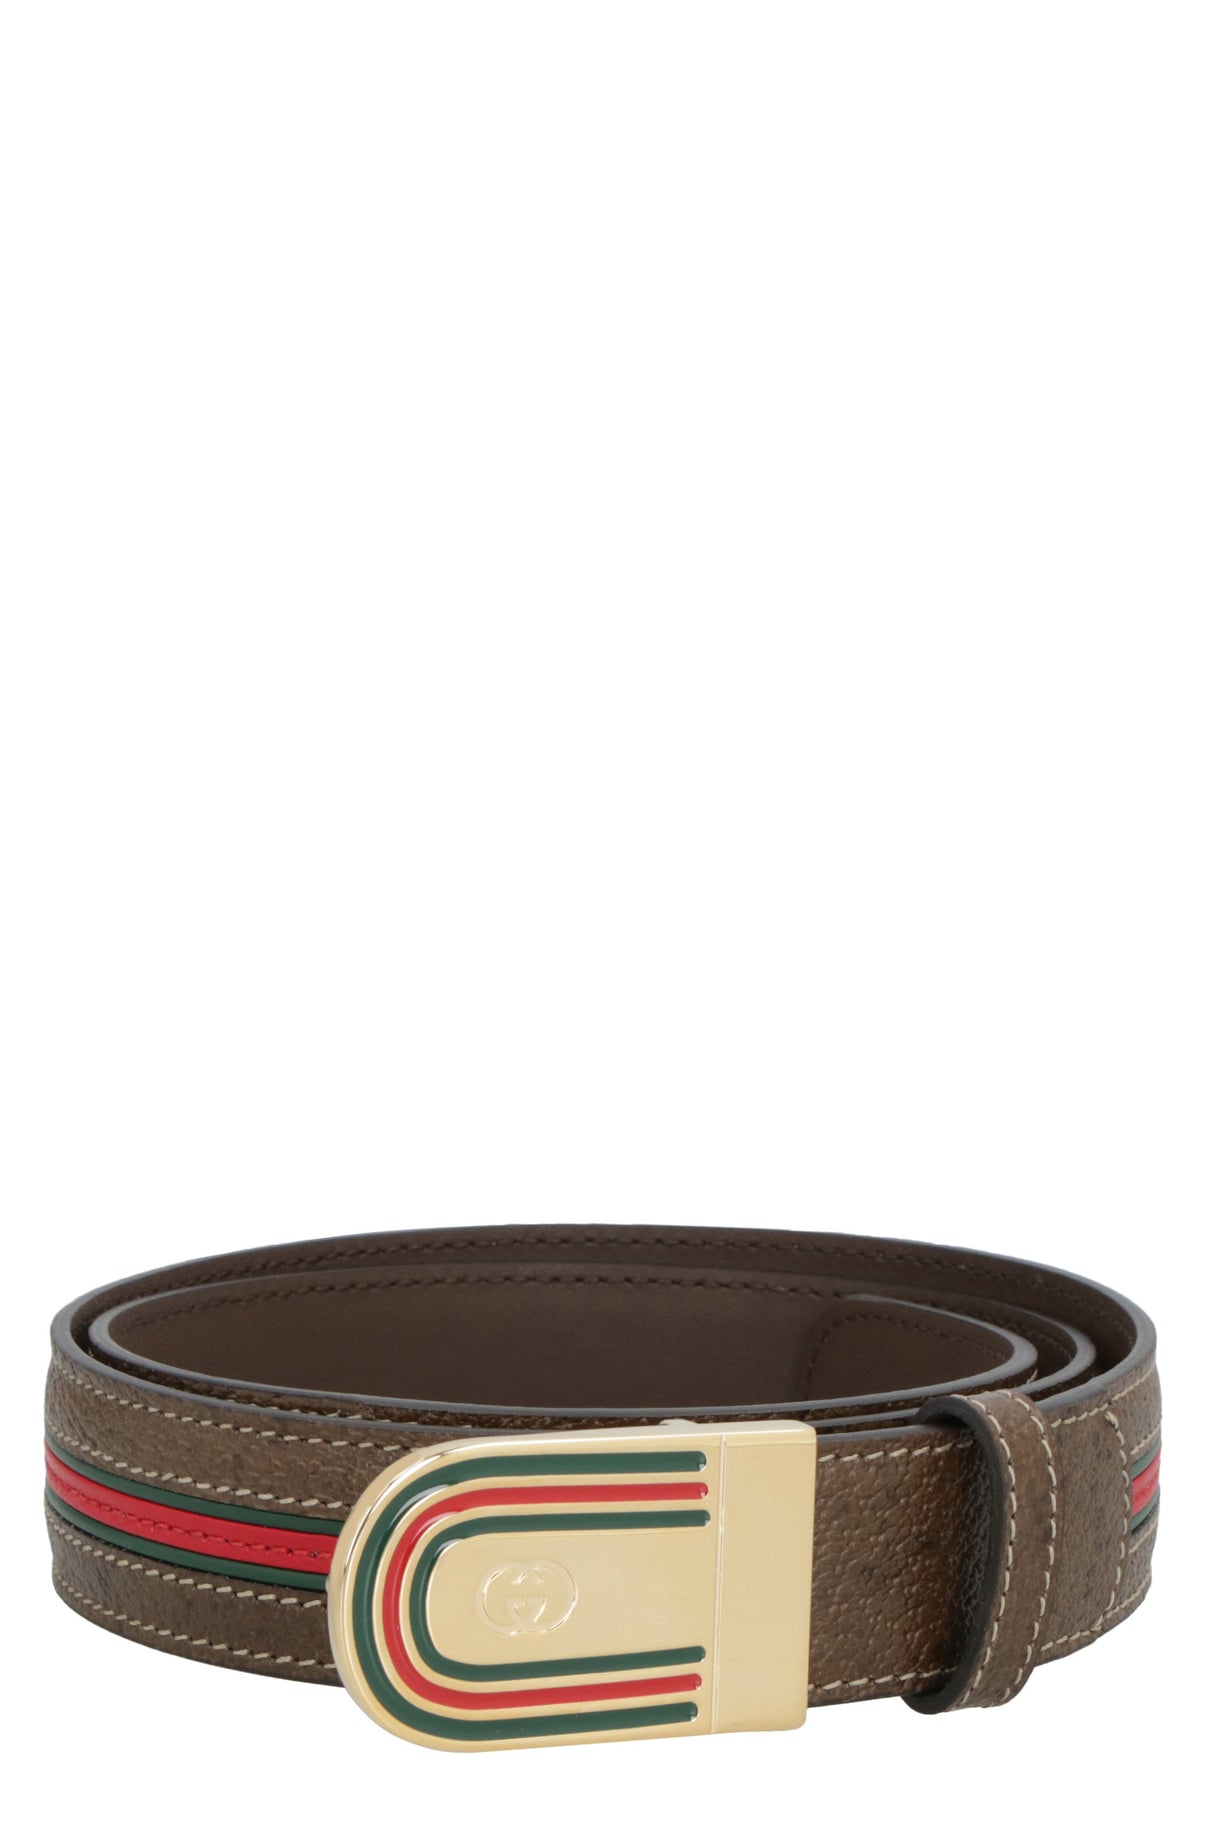 GUCCI Men's Brown Leather Belt - 3 cm Belt Height, 5.5x3 cm Buckle - SS23 Collection